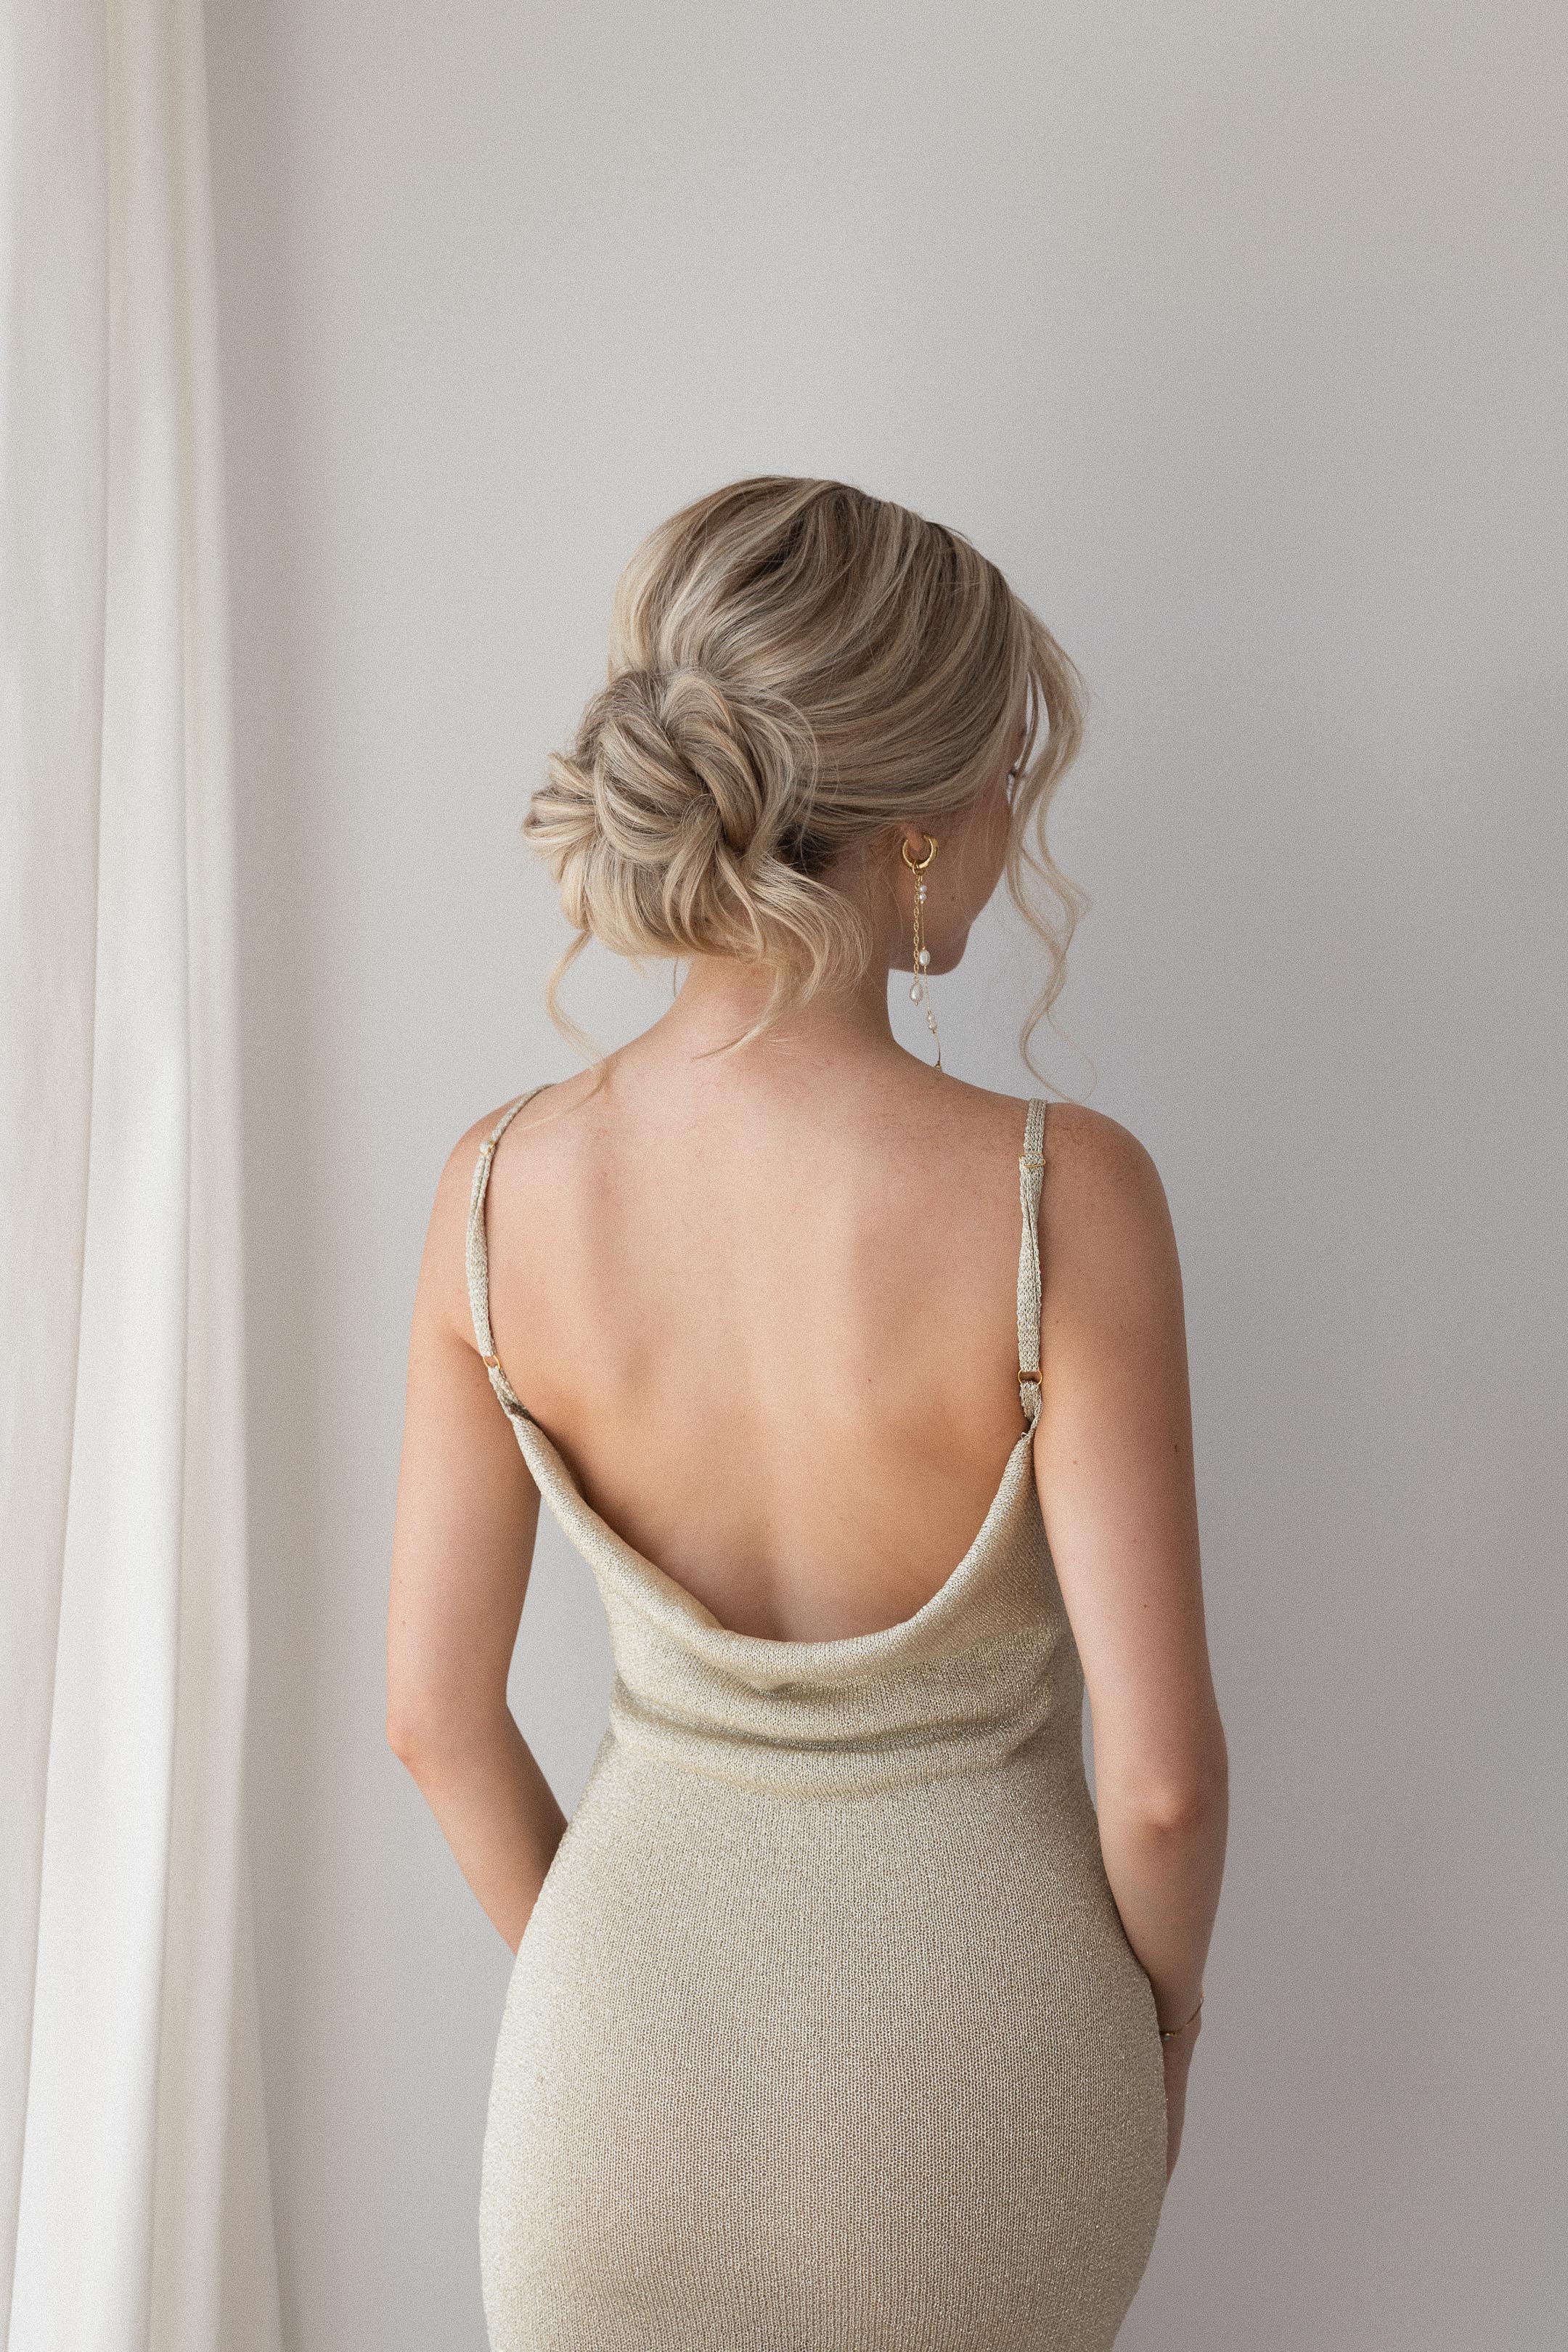 49 Stunning Bridesmaid Hairstyle Ideas For Any Wedding